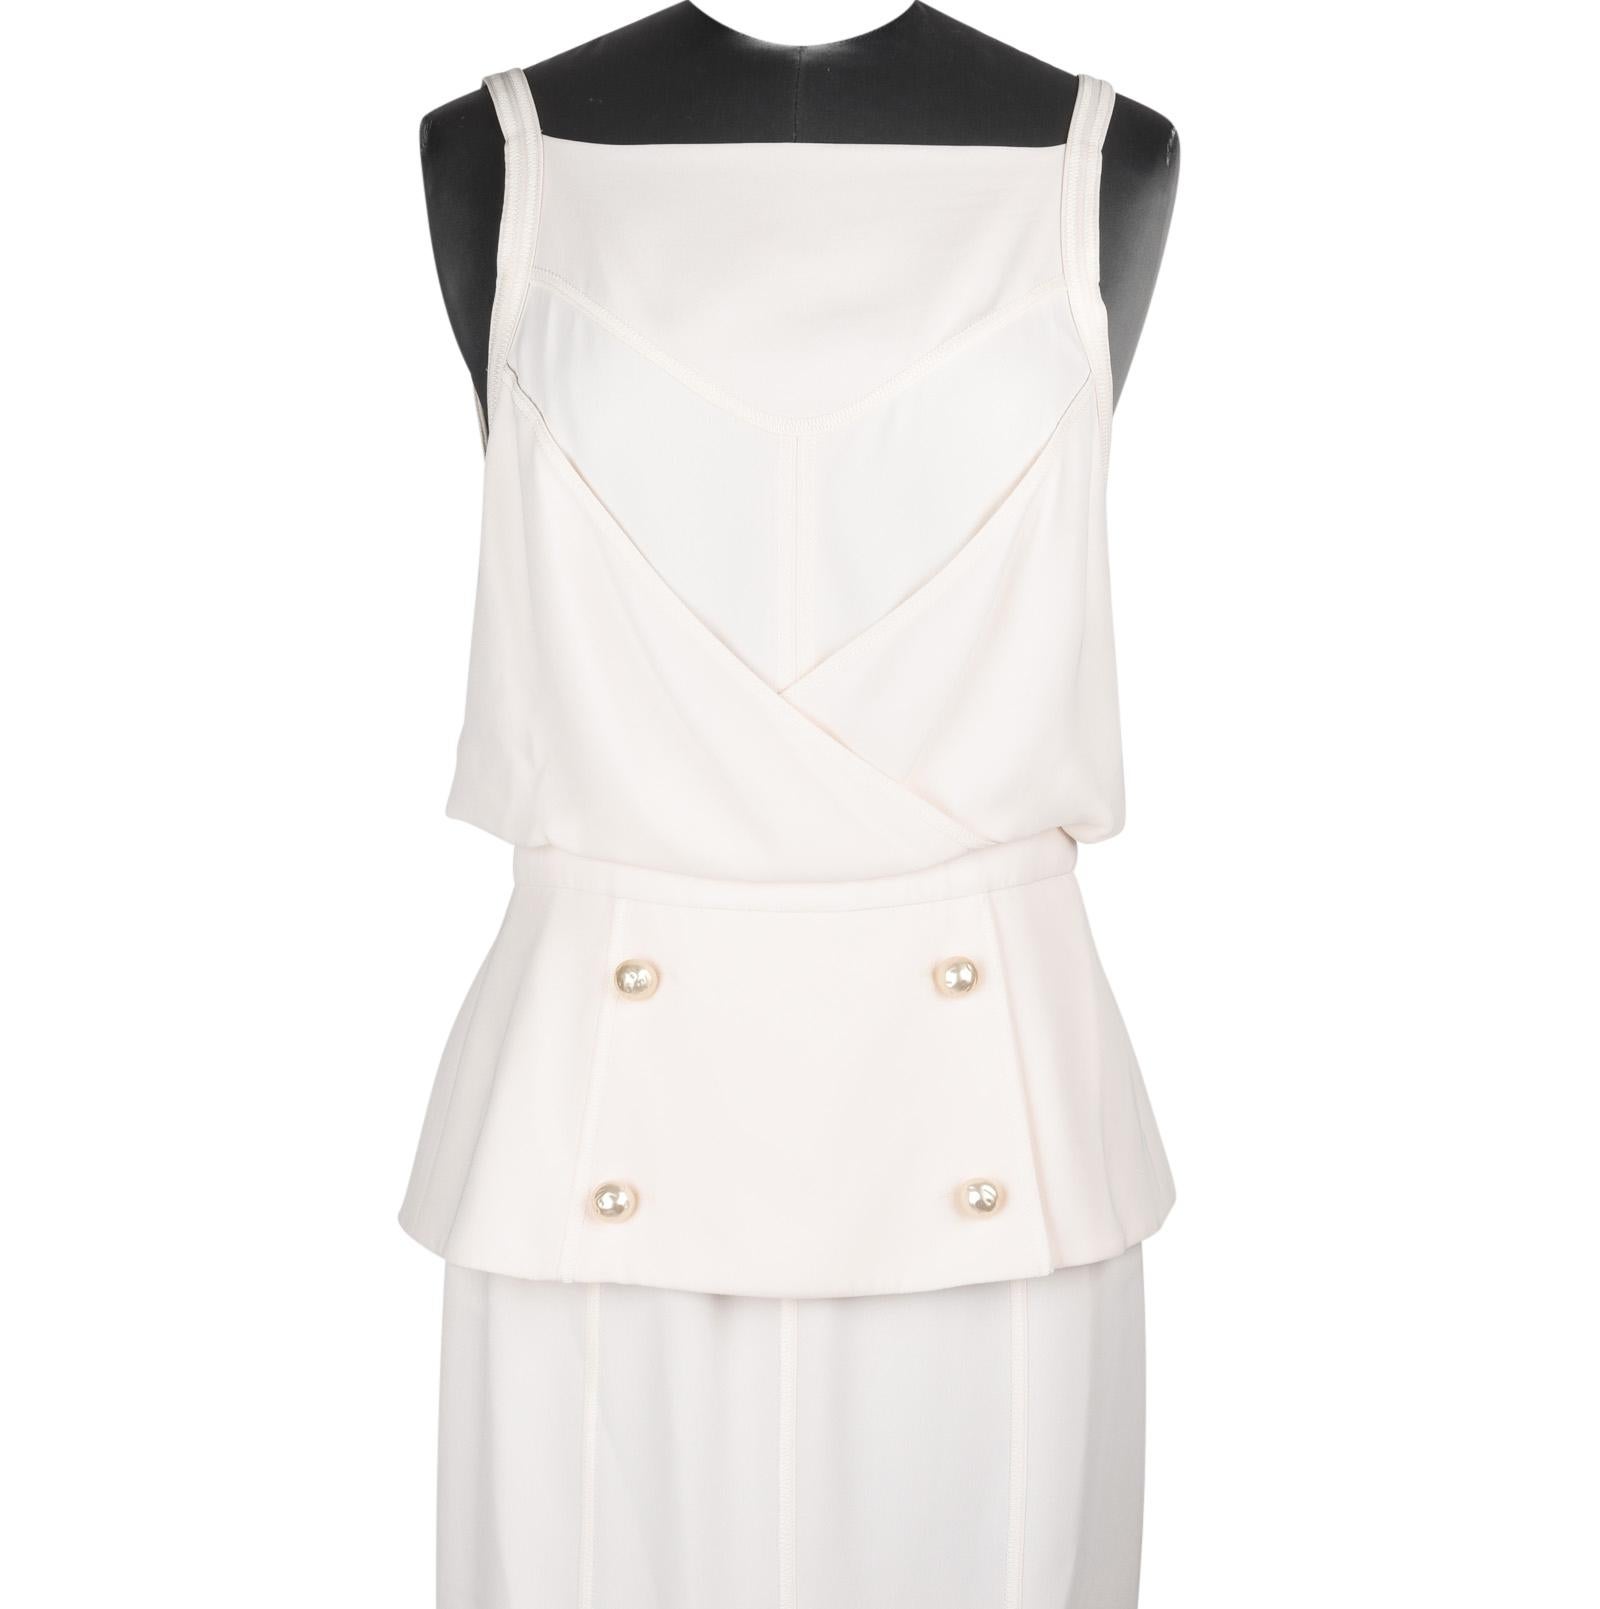 Chanel 14C Dress Backless Evening Winter White Floor Length 36 / 4 nwt 2